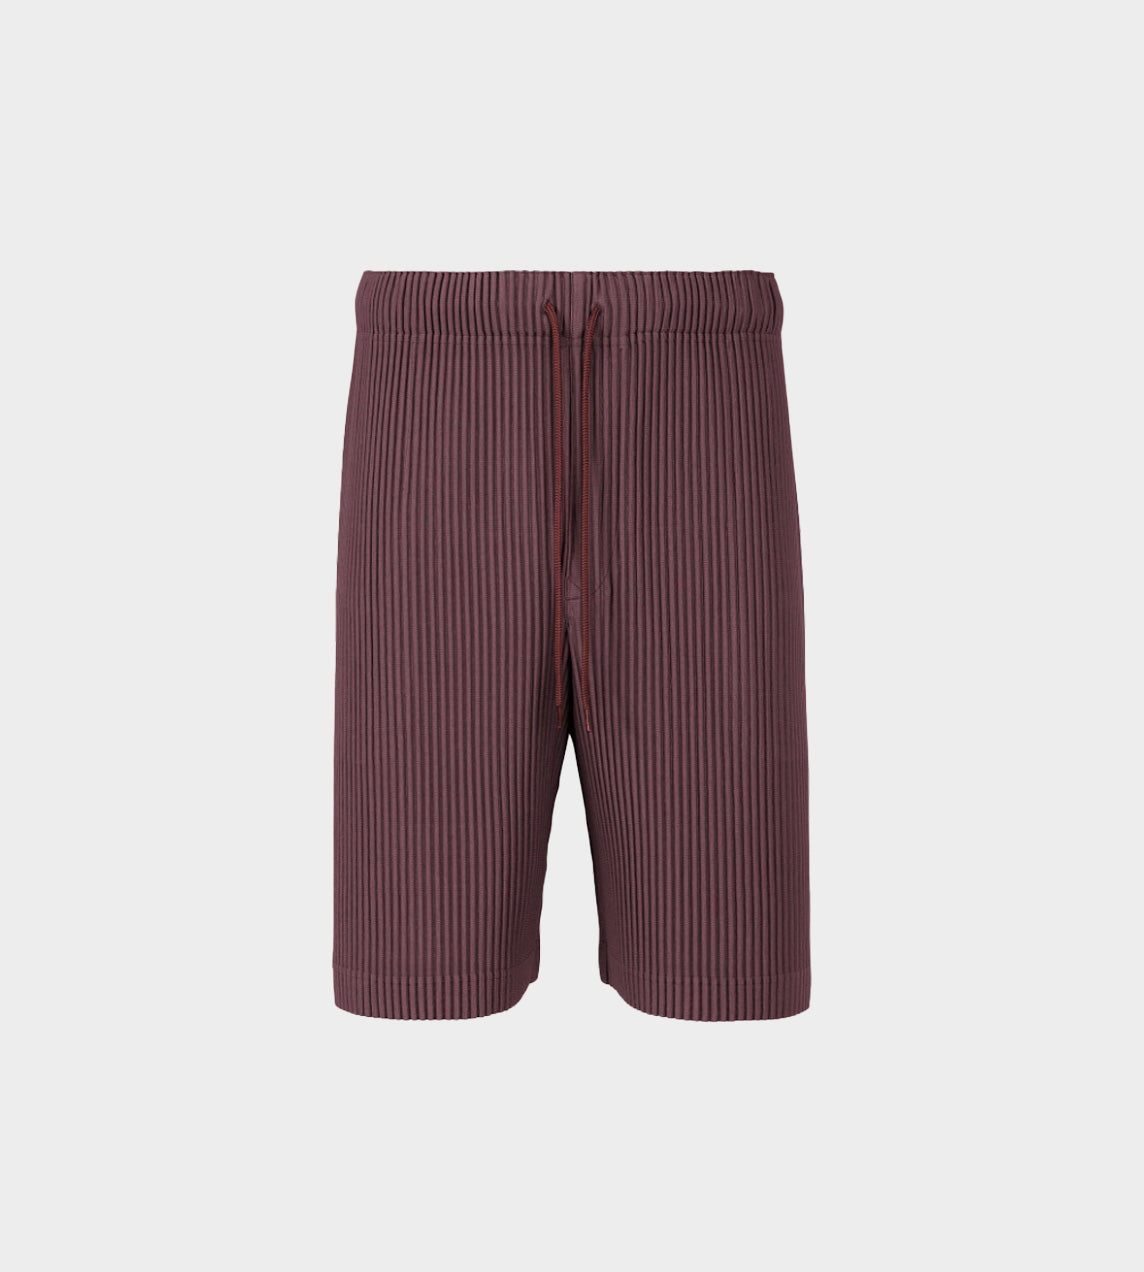 Homme Plisse Issey Miyake - Colour Pleats Long Shorts Dark Brown